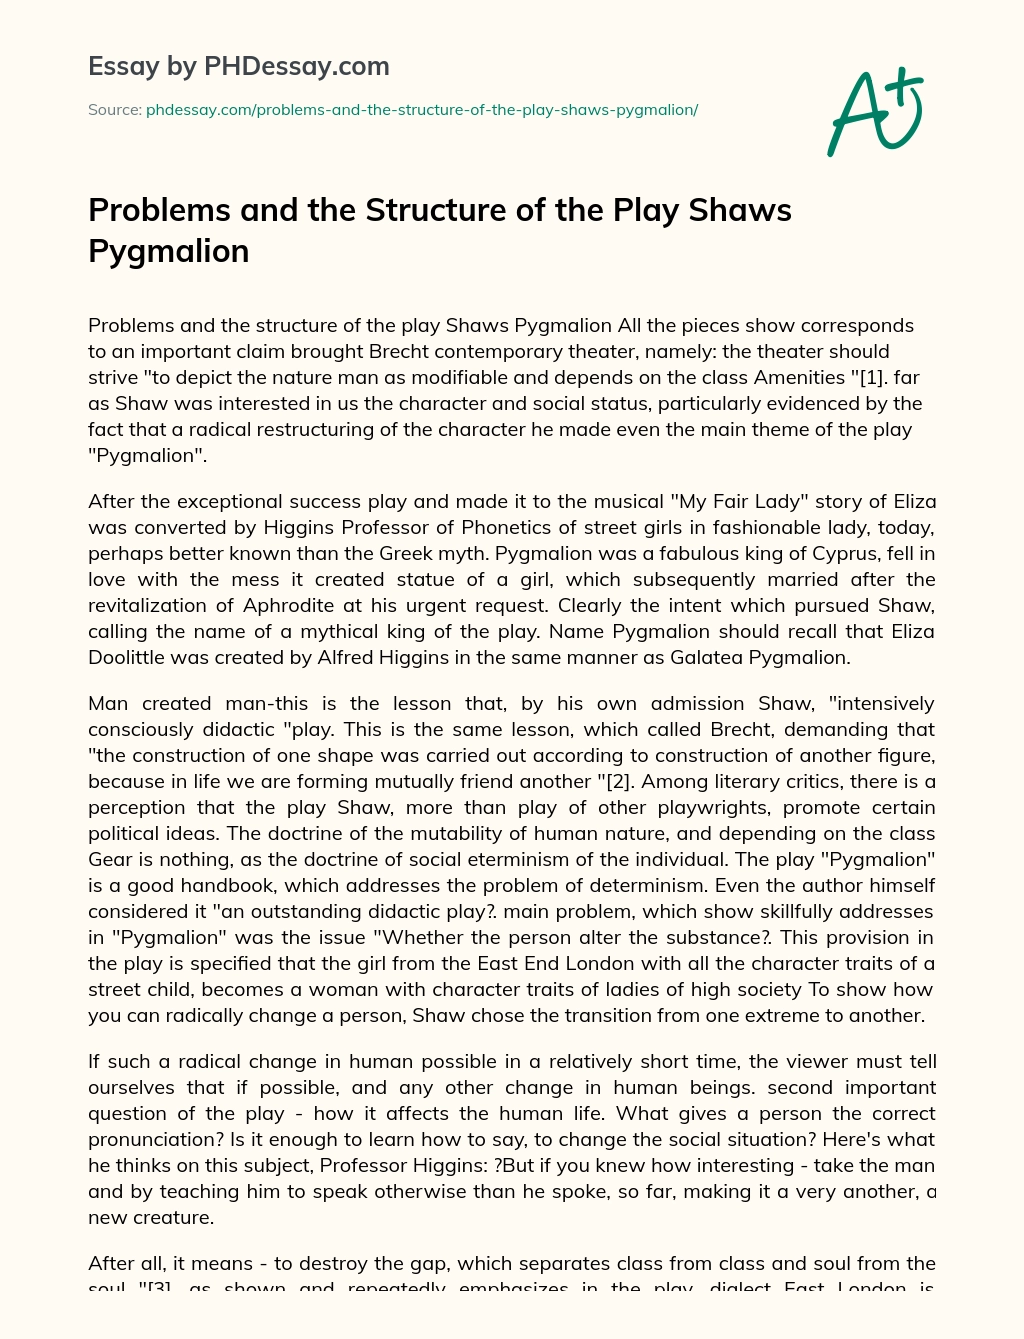 Problems and the Structure of the Play Shaws Pygmalion essay